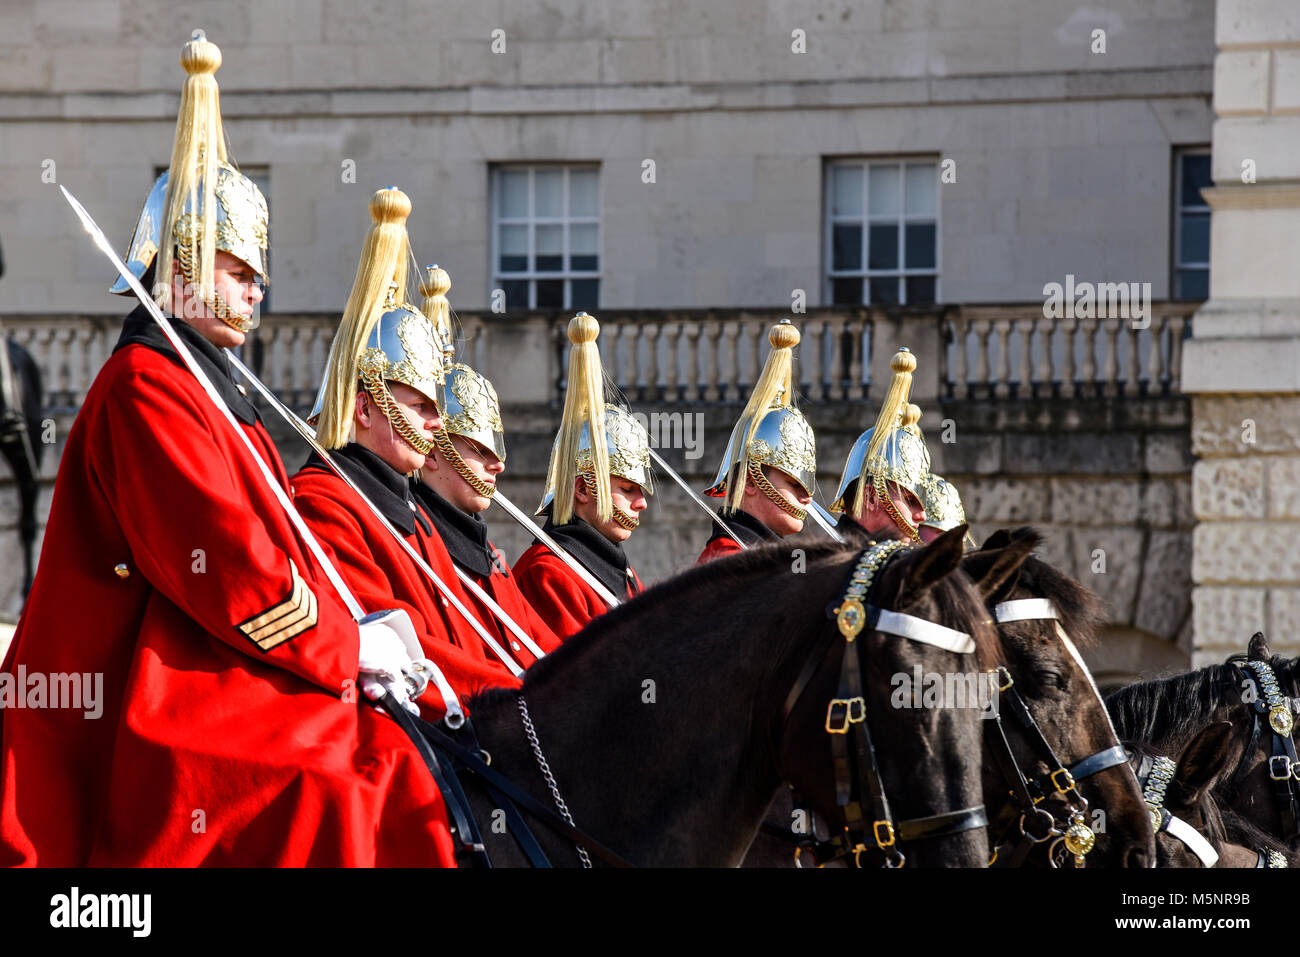 Changing of the guard, Horse Guards Parade, London. Life Guards Household Cavalry mounted soldiers in ceremonial winter dress. Horses Stock Photo